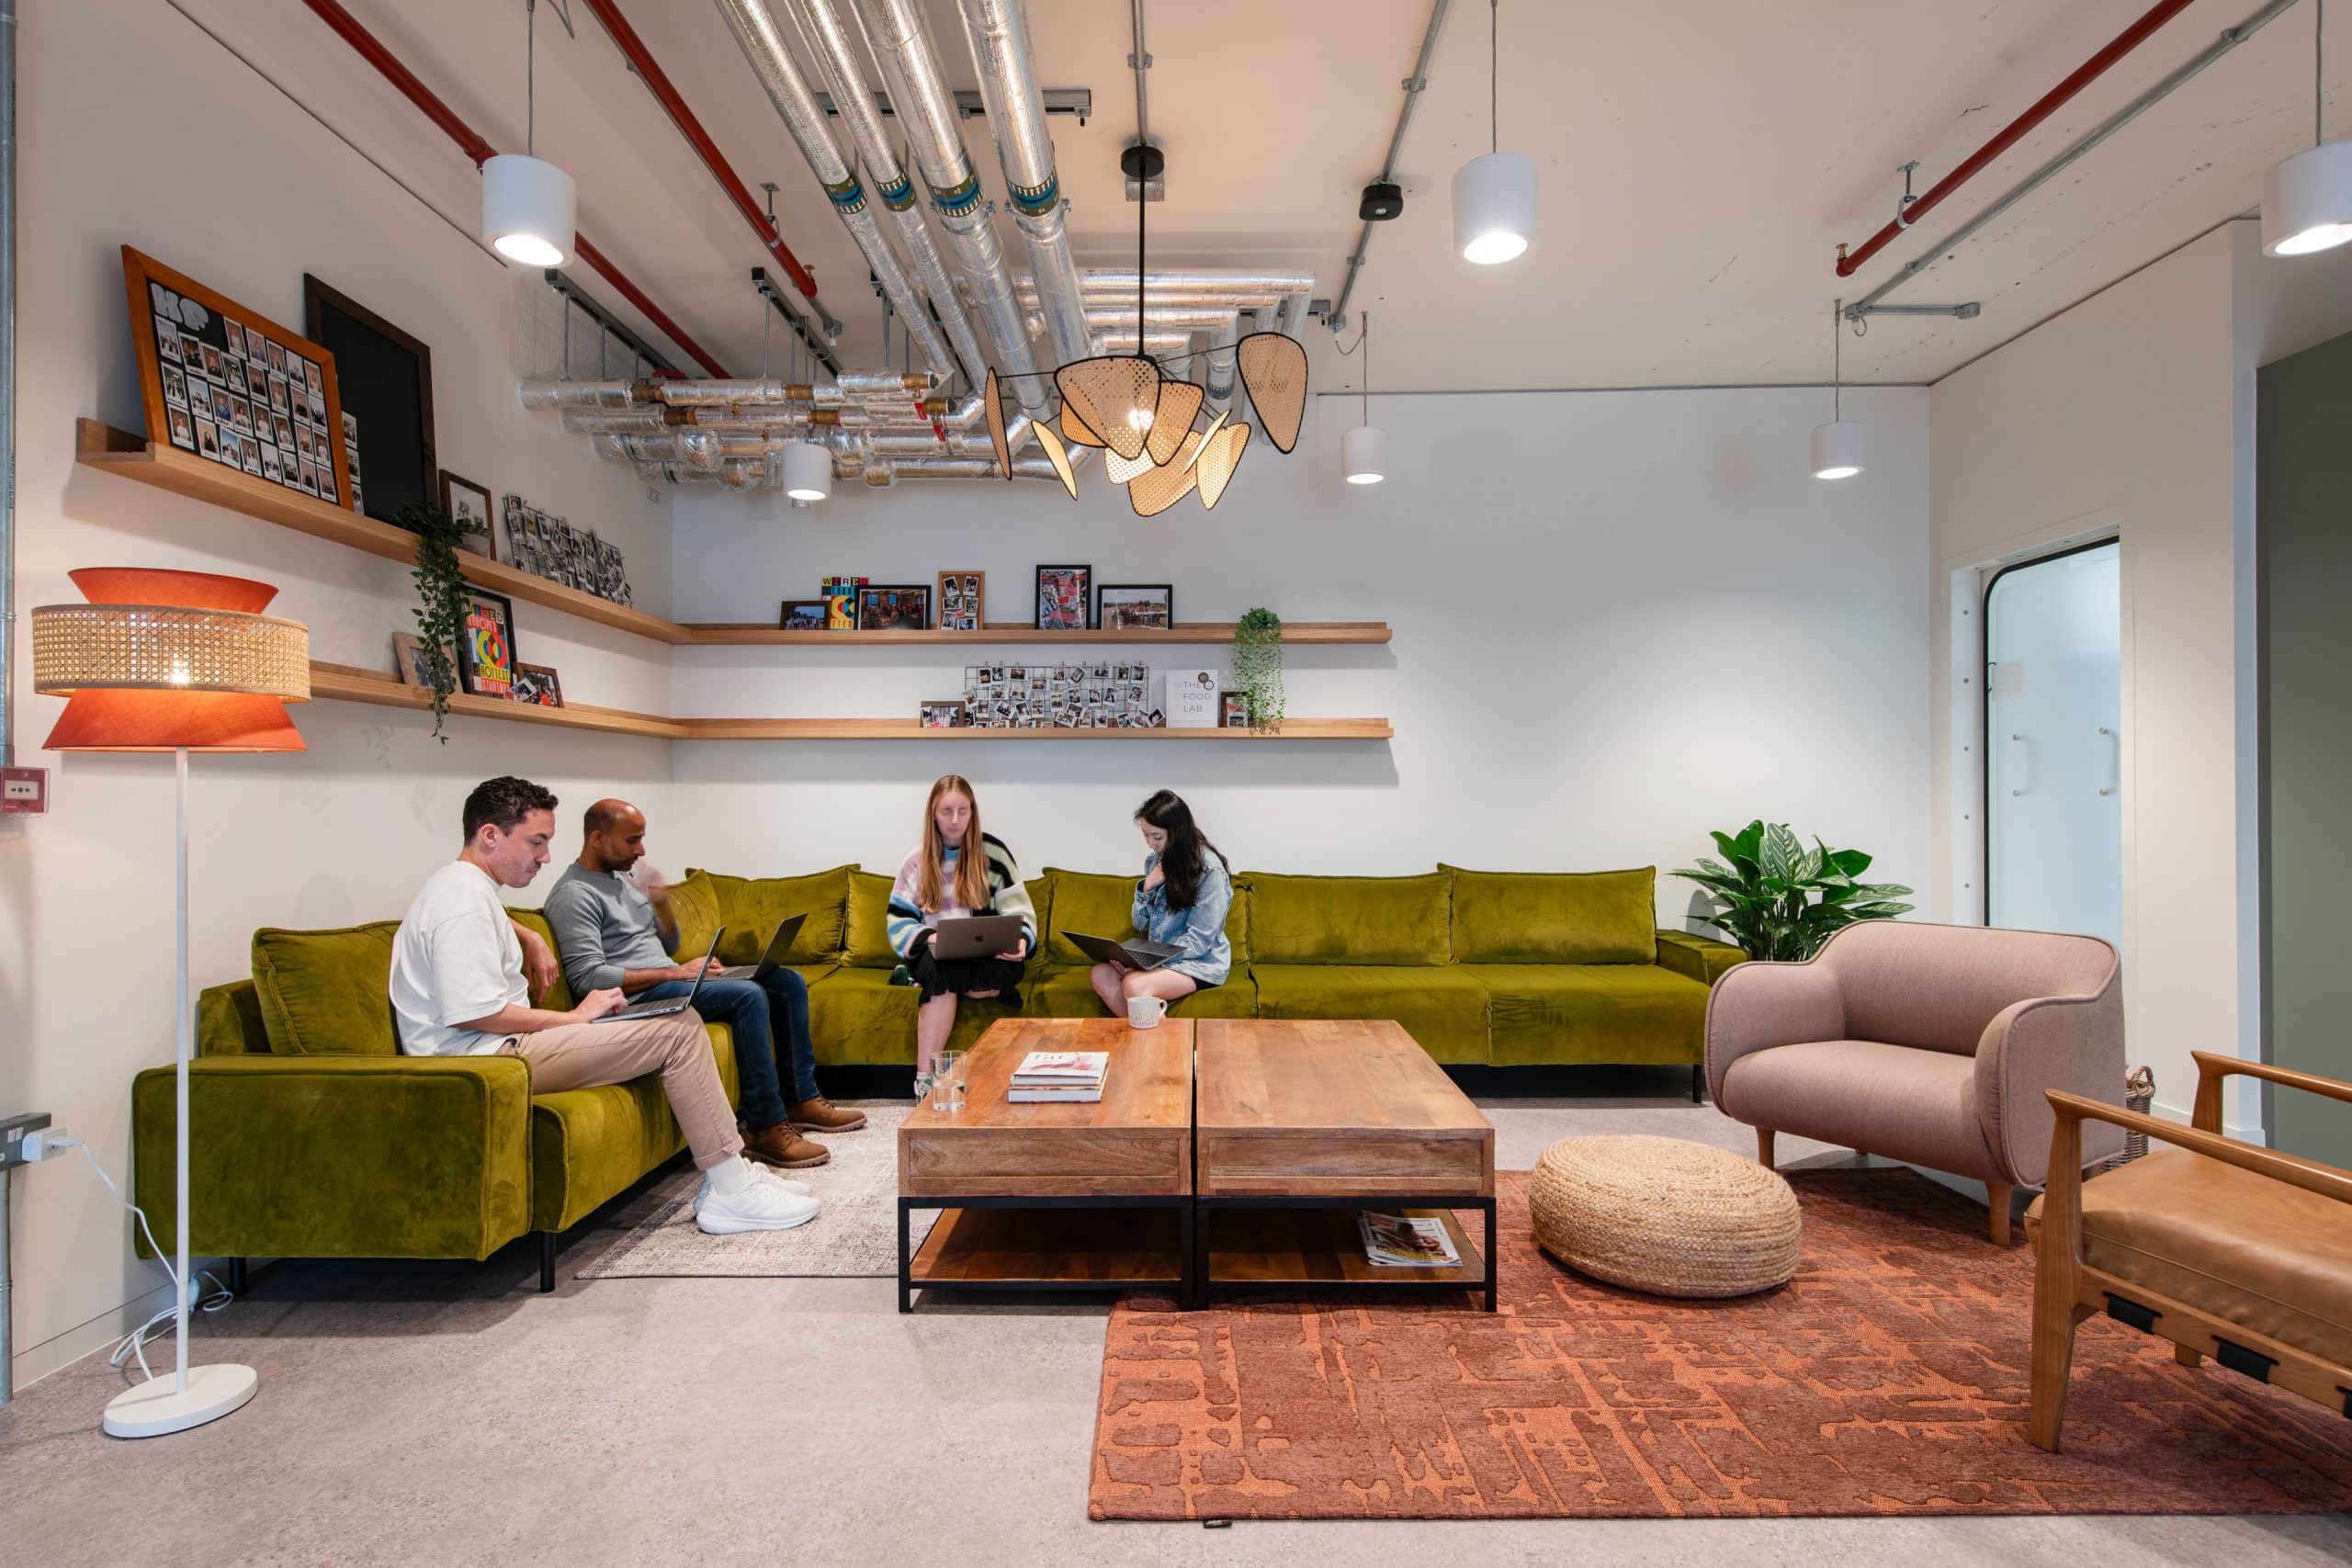 A group of people are shown working together in a comfortable lounge setting that helps enable all personality types to feel comfortable in the workplace.